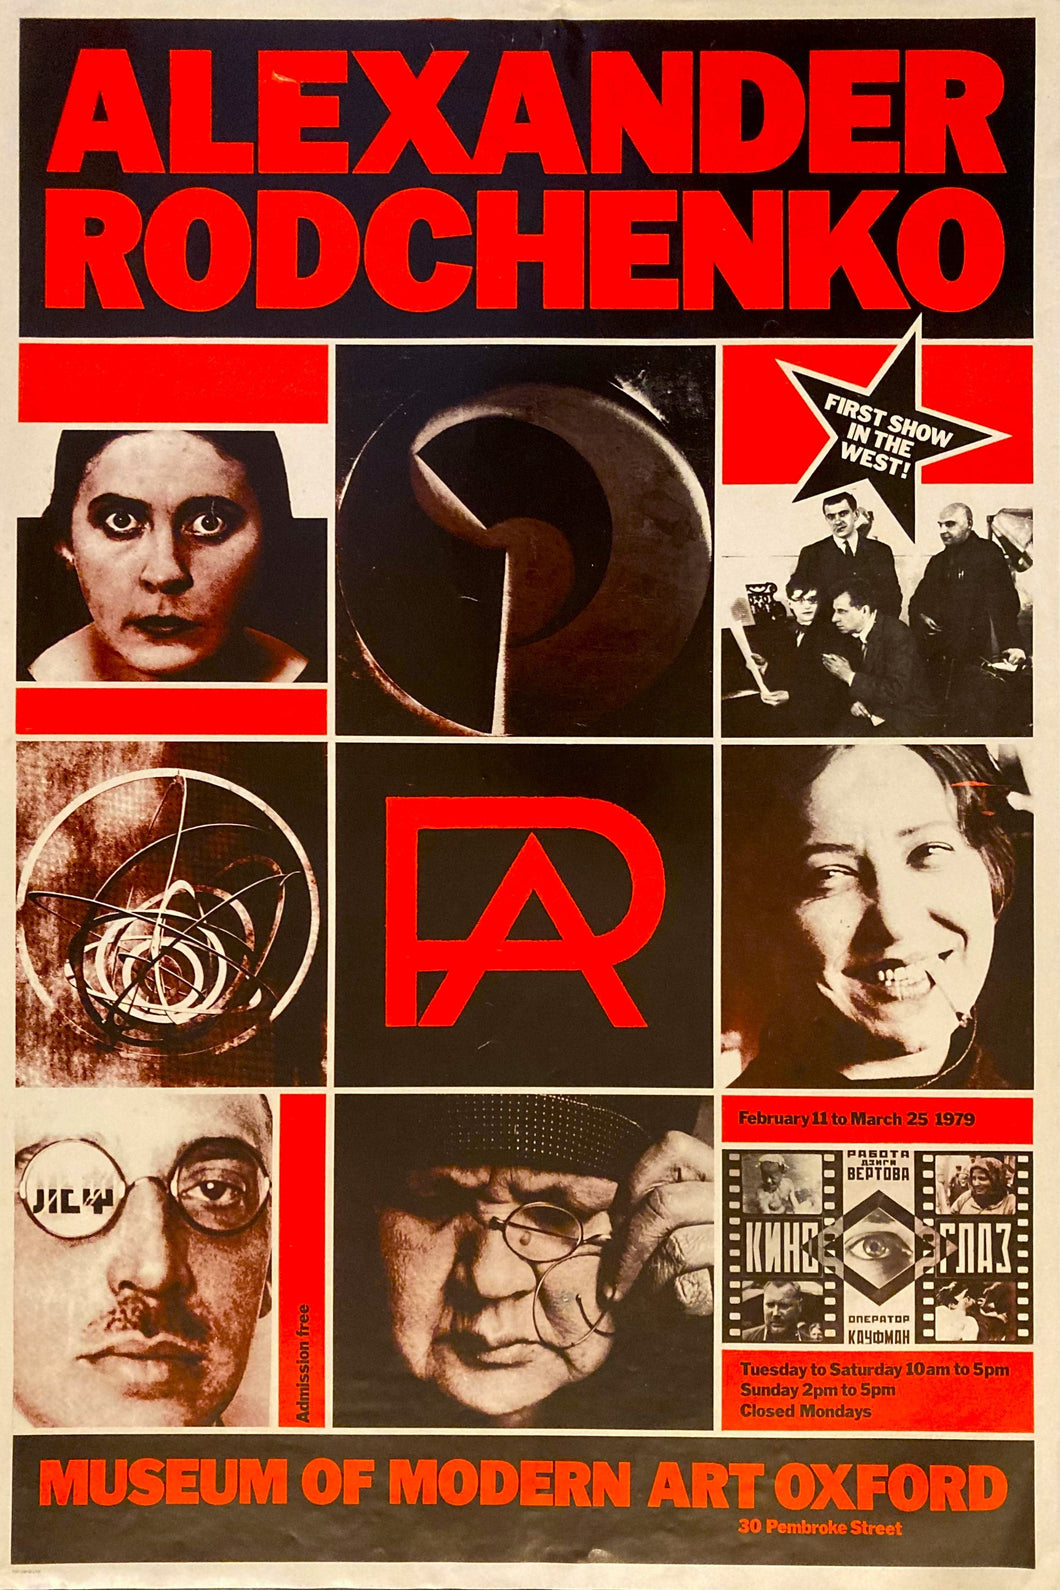 Alexander Rodchenko original exhibition poster - Museum of Modern Art Oxford 1979 - Original Music and Movie Posters for sale from Bamalama - Online Poster Store UK London